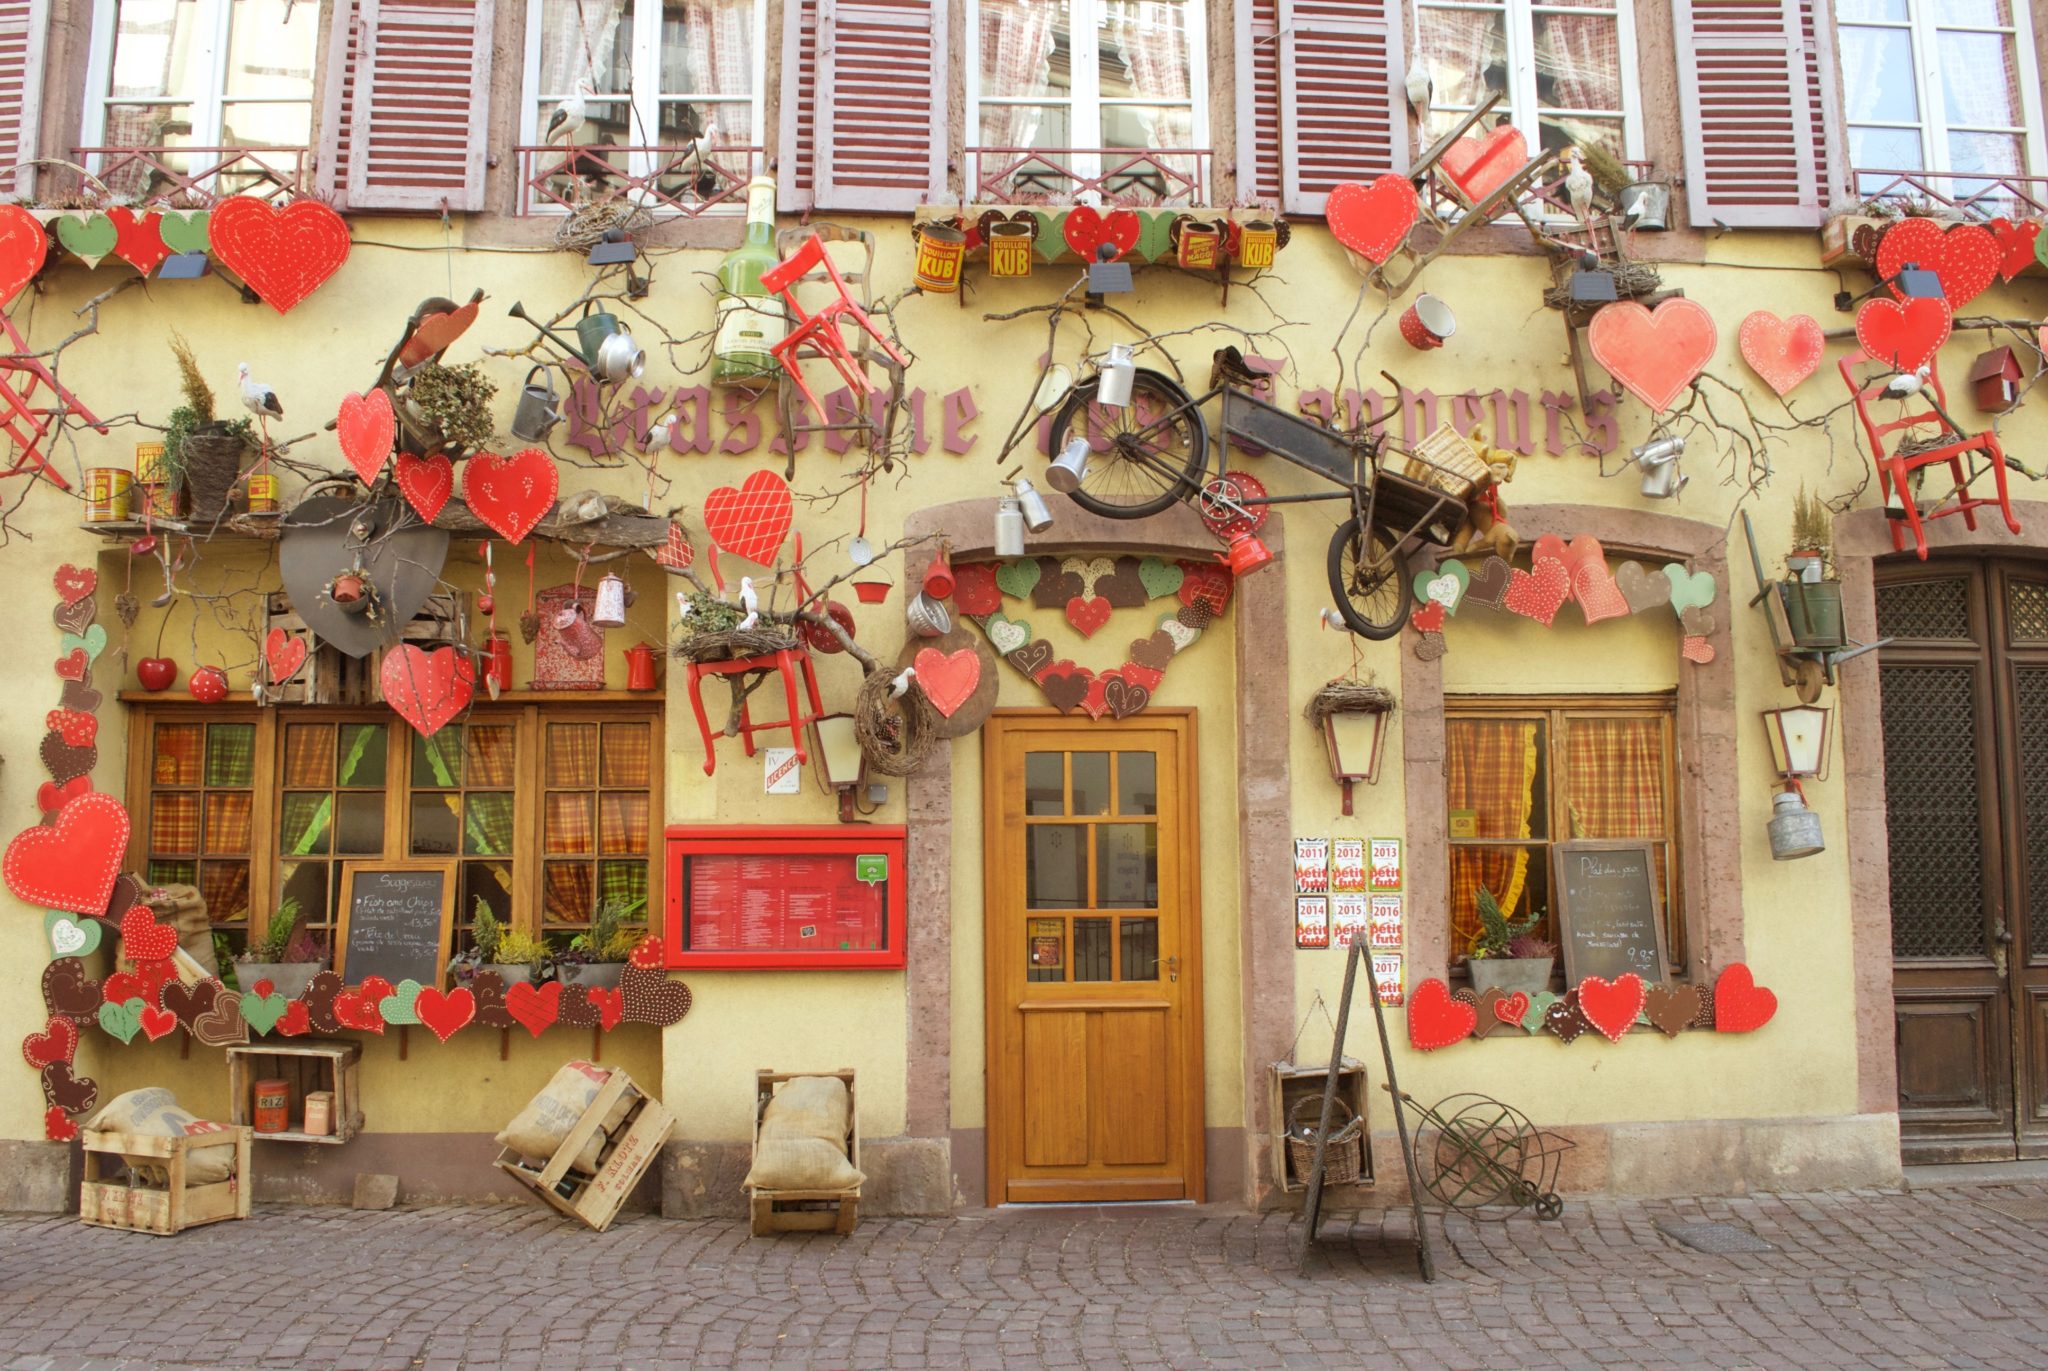 France: Alsace With Kids! – We Go With Kids!